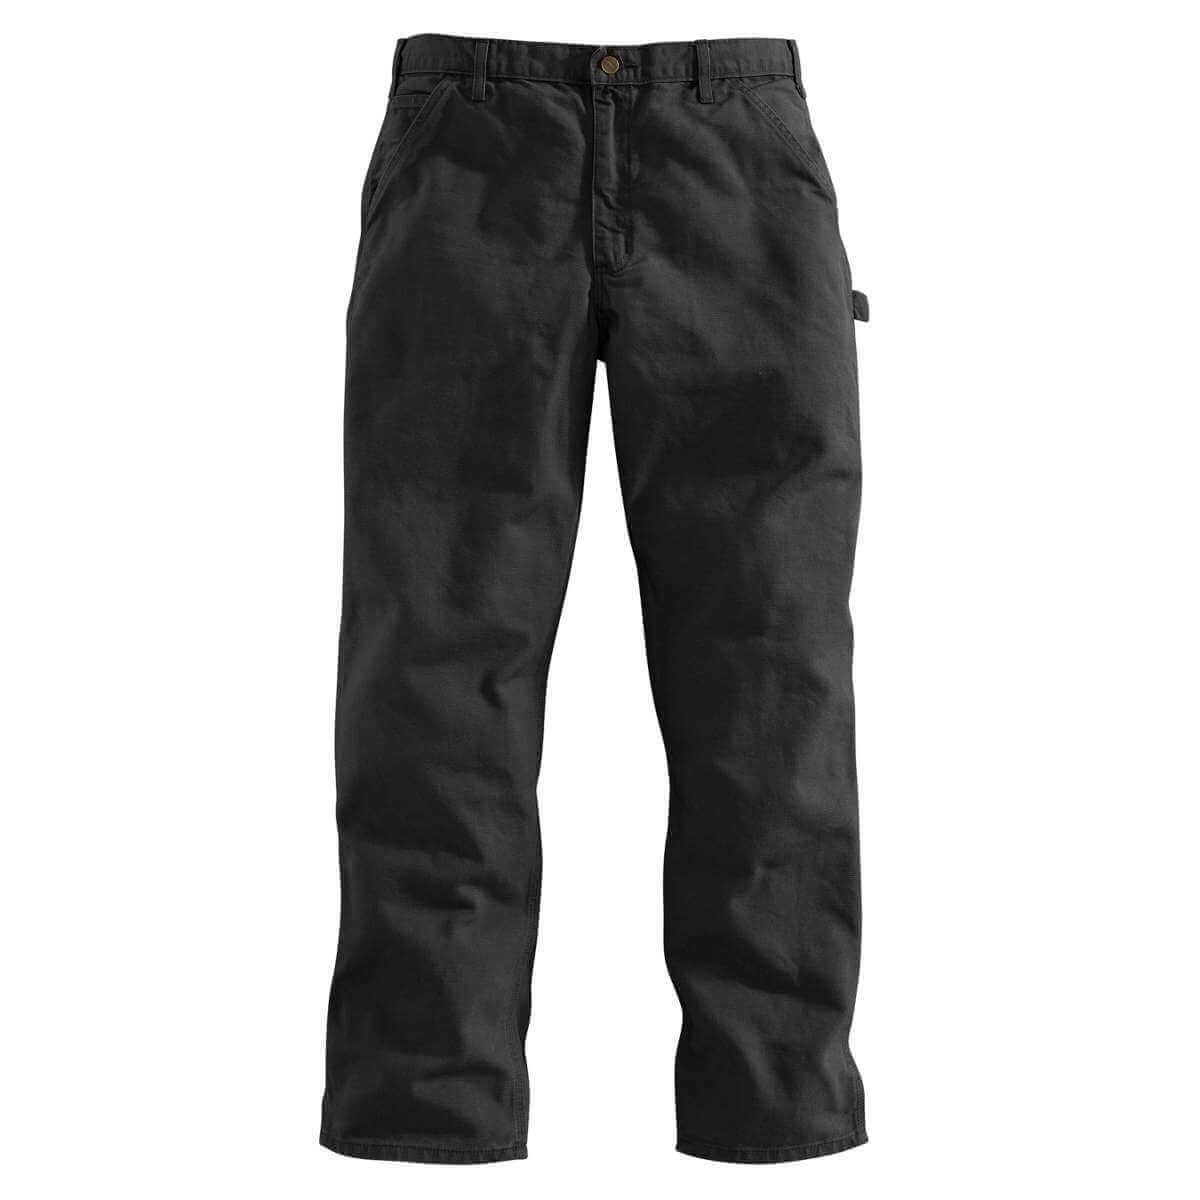 Carhartt Men's Loose Fit Washed Duck Utility Work Pant BLK Black